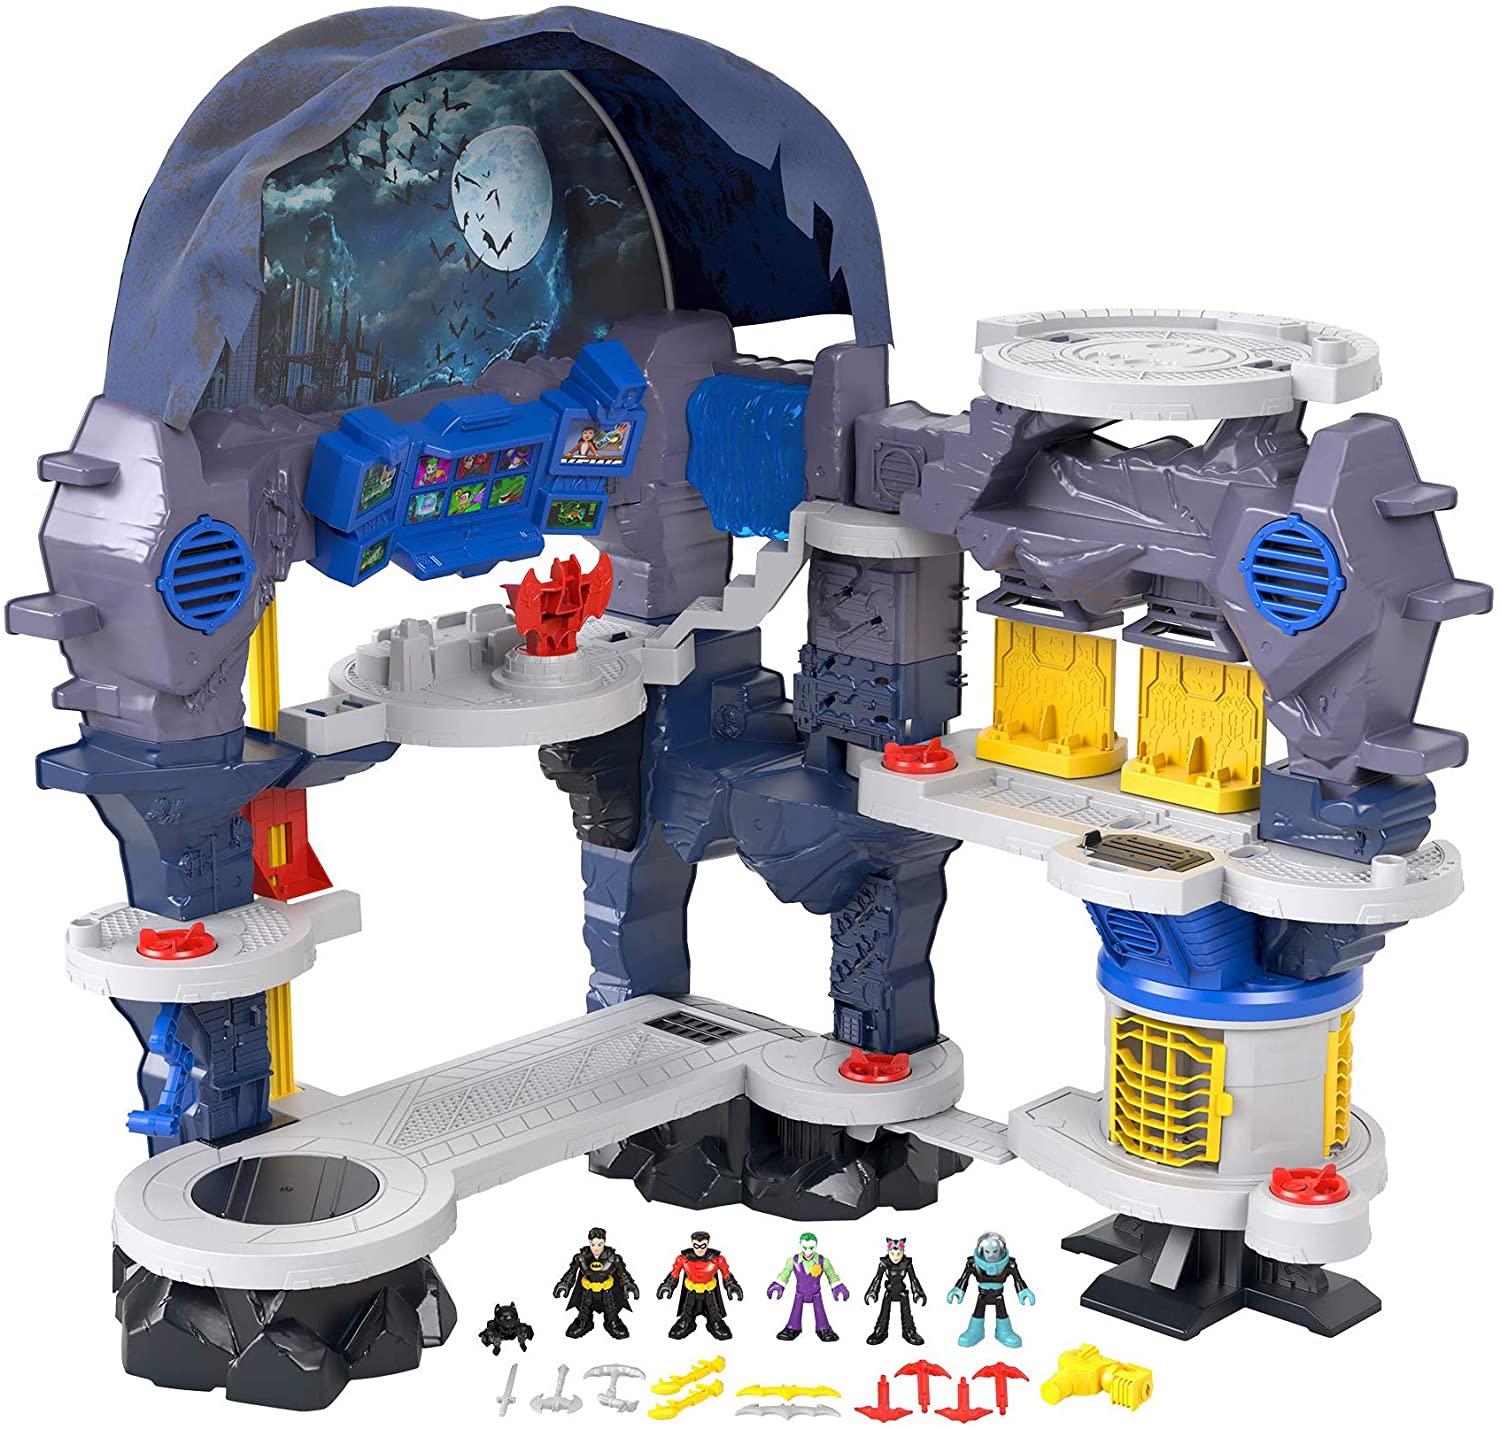 Geek Daily Deals 103120 fisher price batcave set